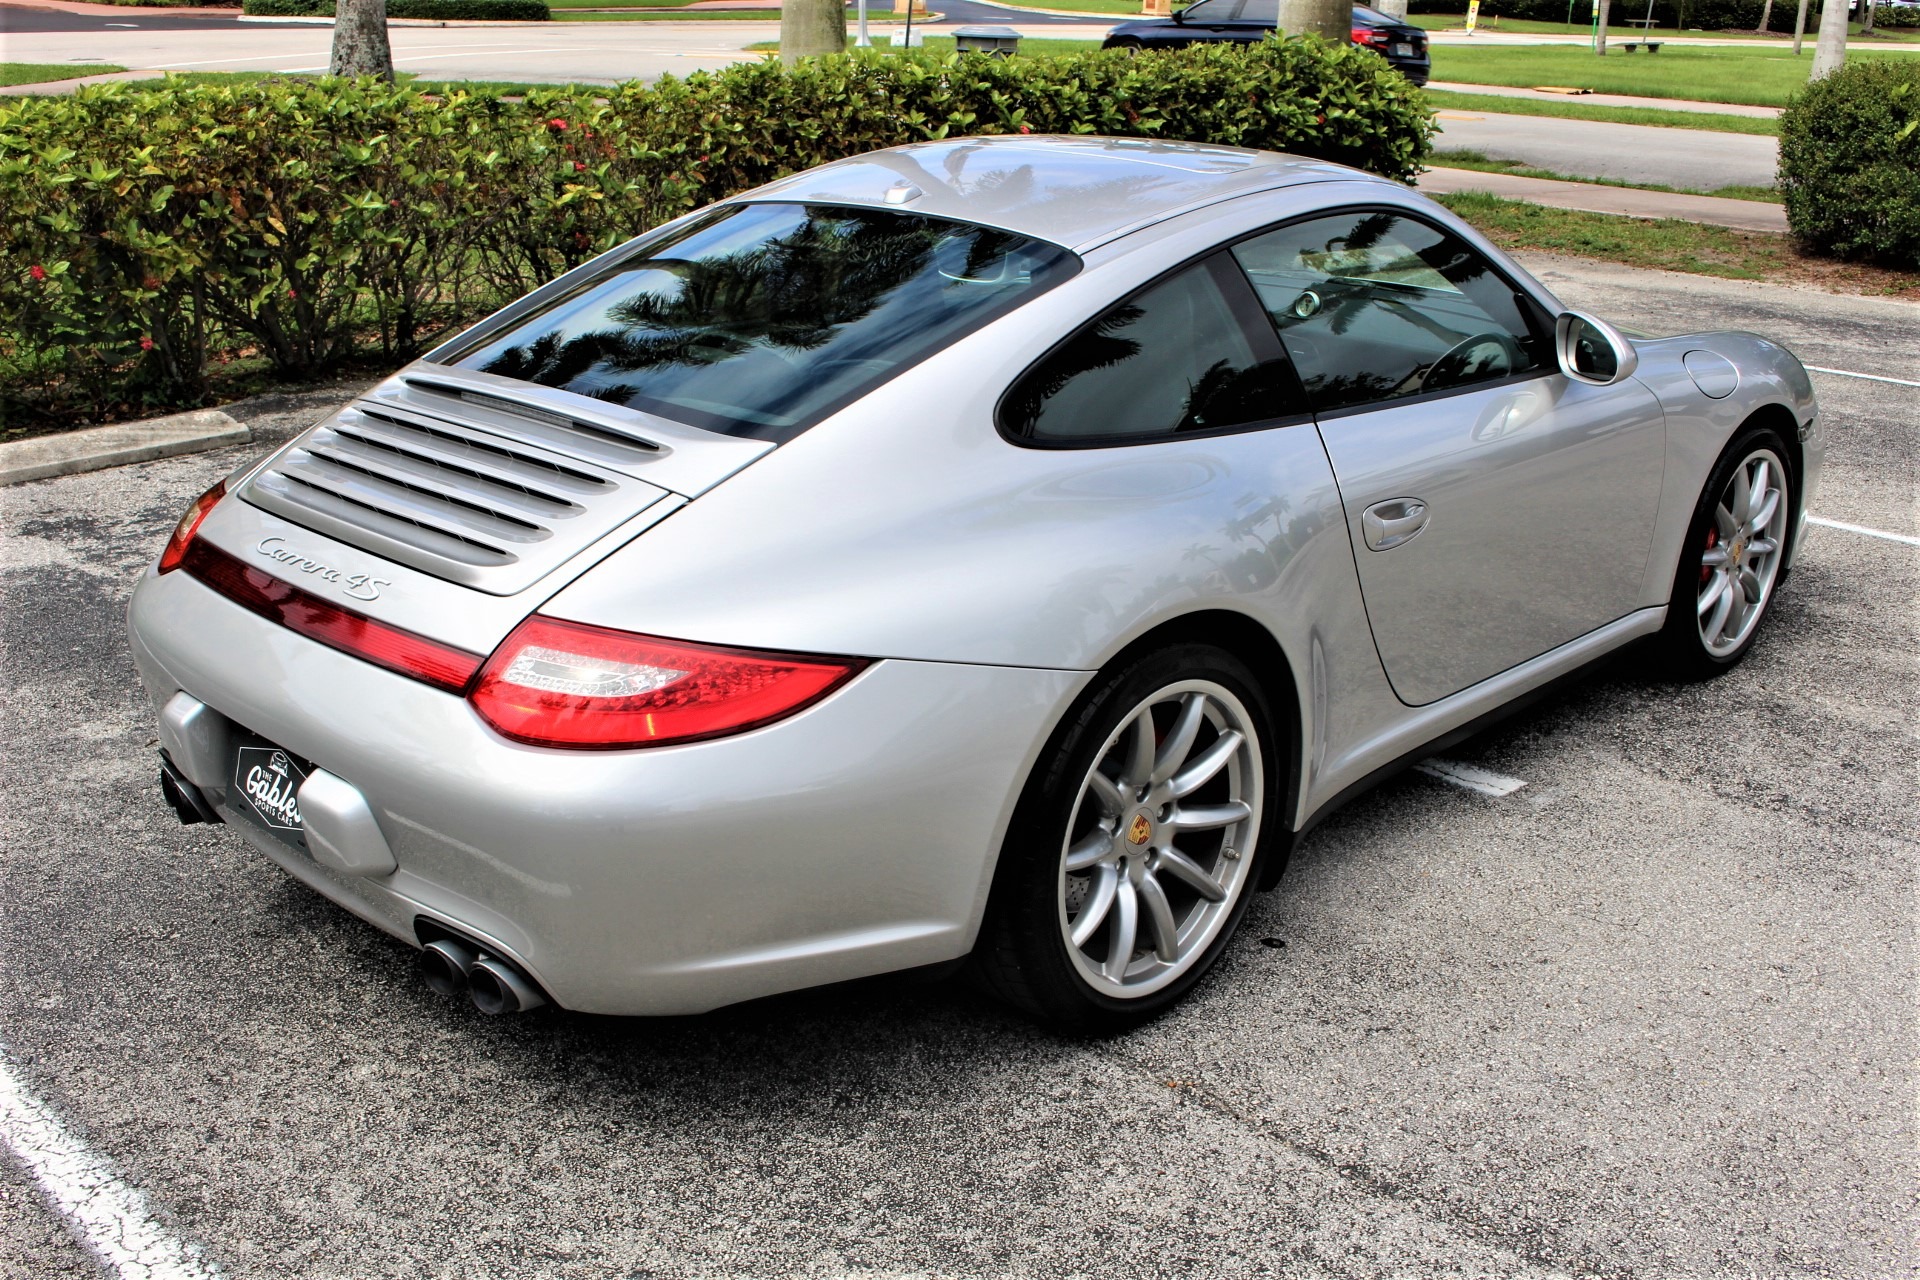 Used 2009 Porsche 911 Carrera 4S for sale Sold at The Gables Sports Cars in Miami FL 33146 4